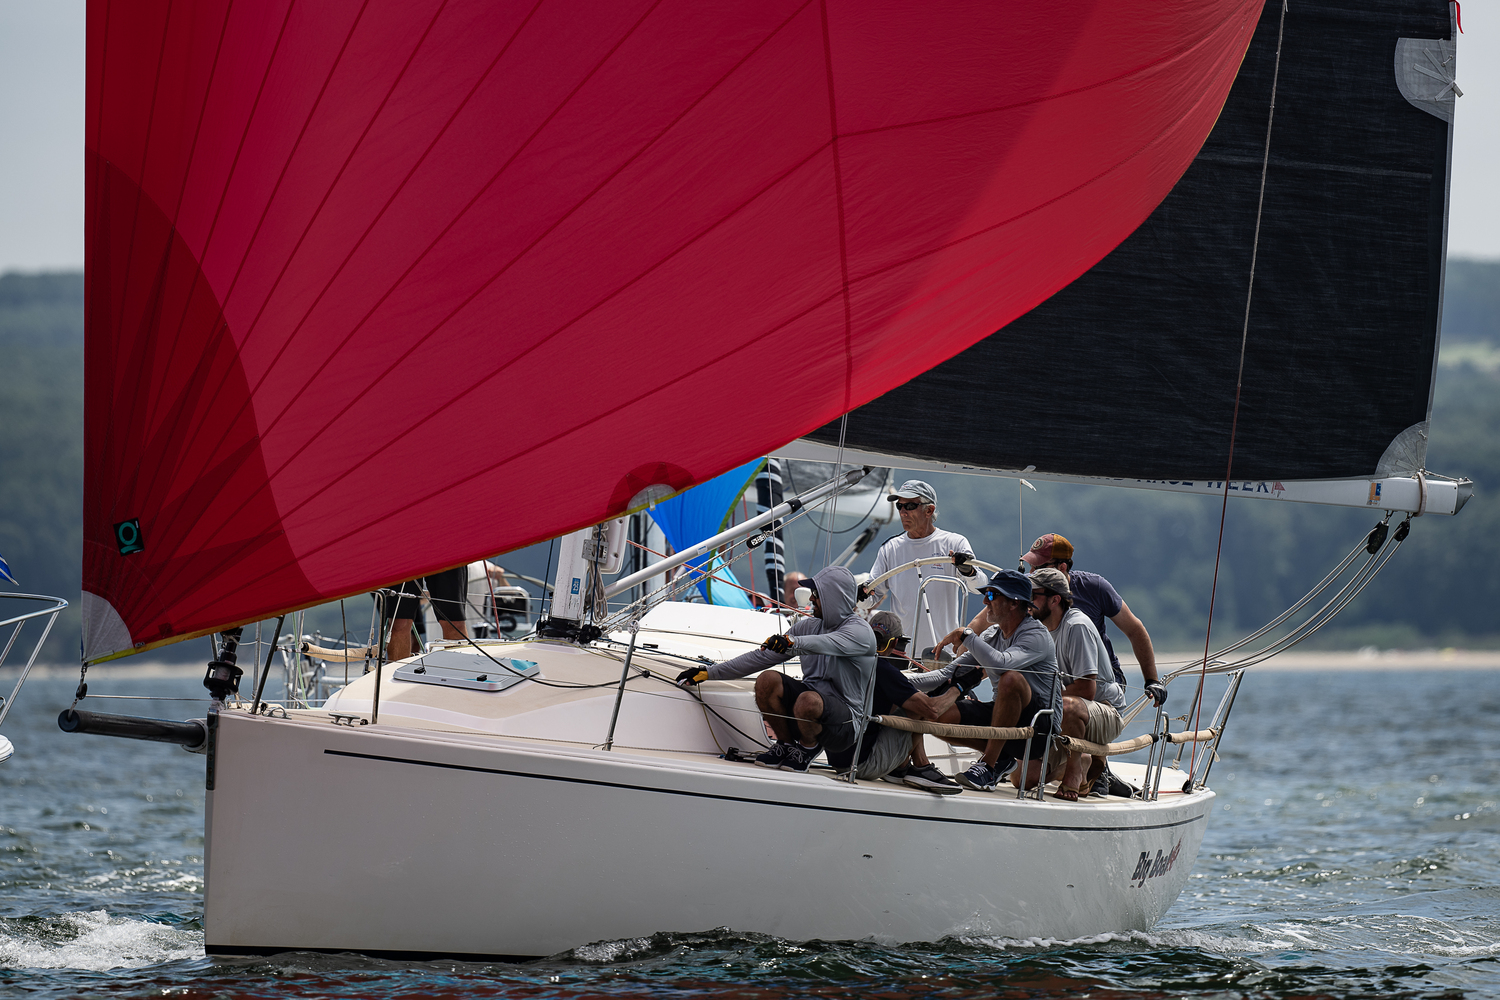 Bud Rogers and crew in Big Boat. They were the big winners of the Sag Harbor Cup.  GARY SENFT/EASTENDMARINEPHOTOGRAPHY.COM